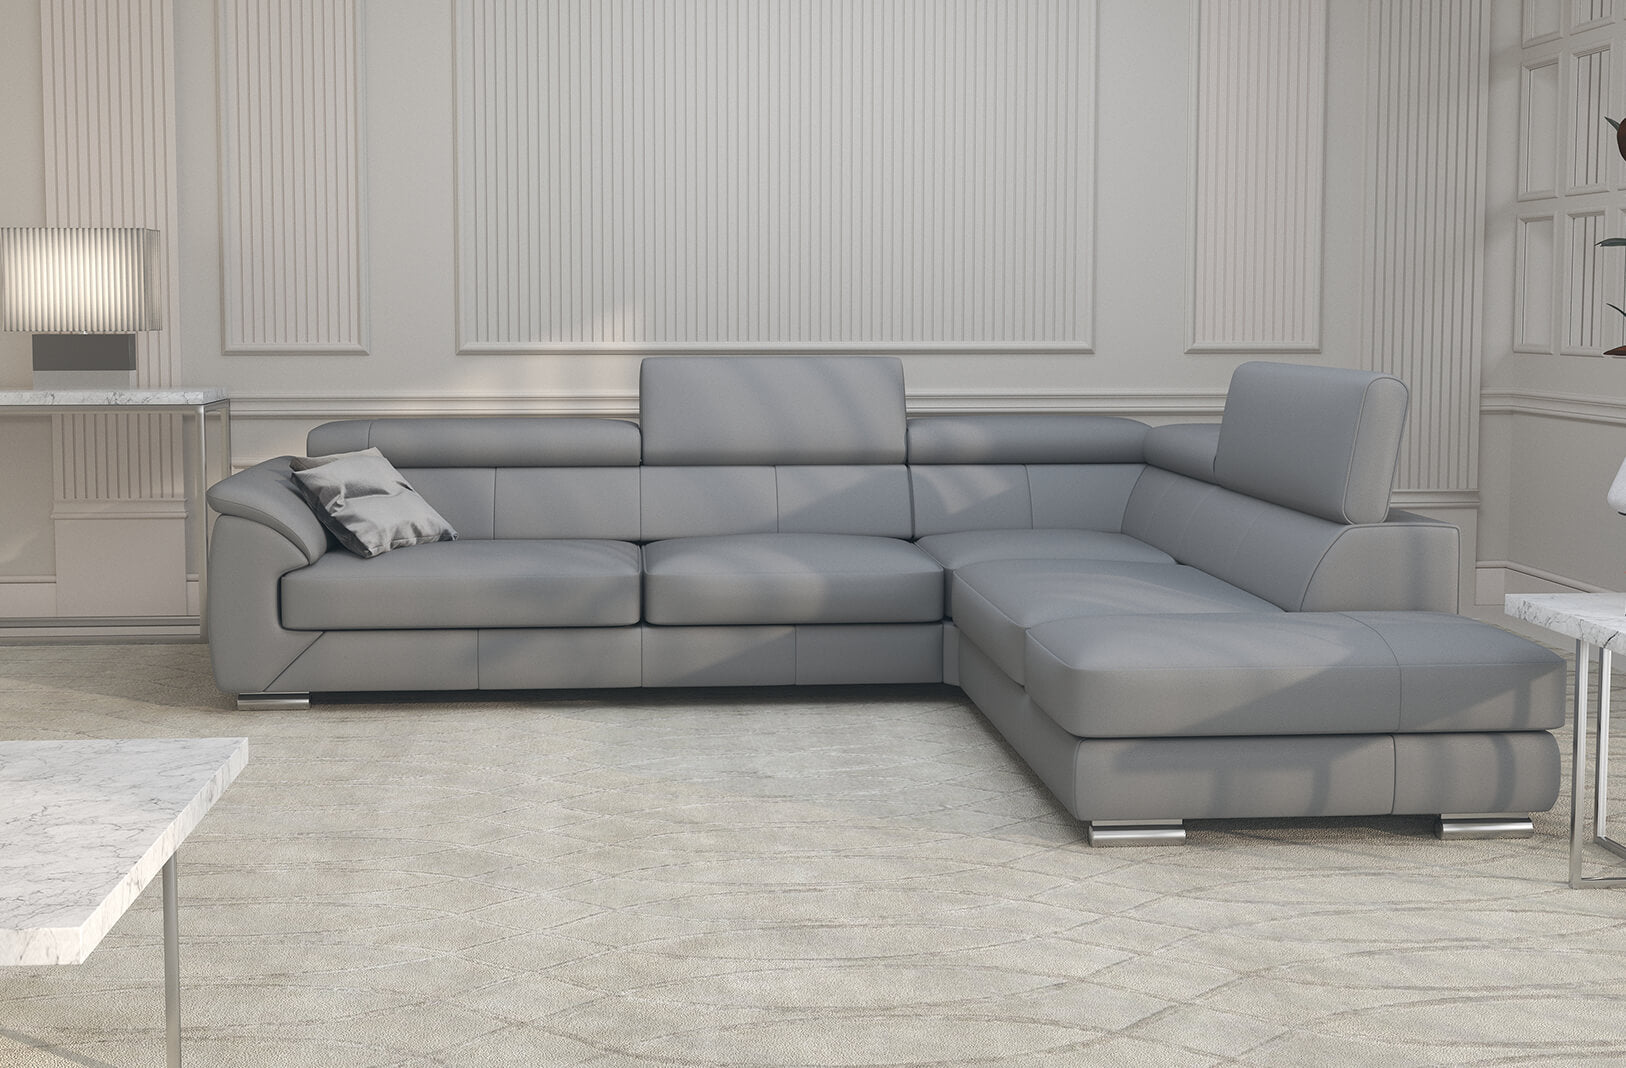 Nicole Gray Leather modern sectional